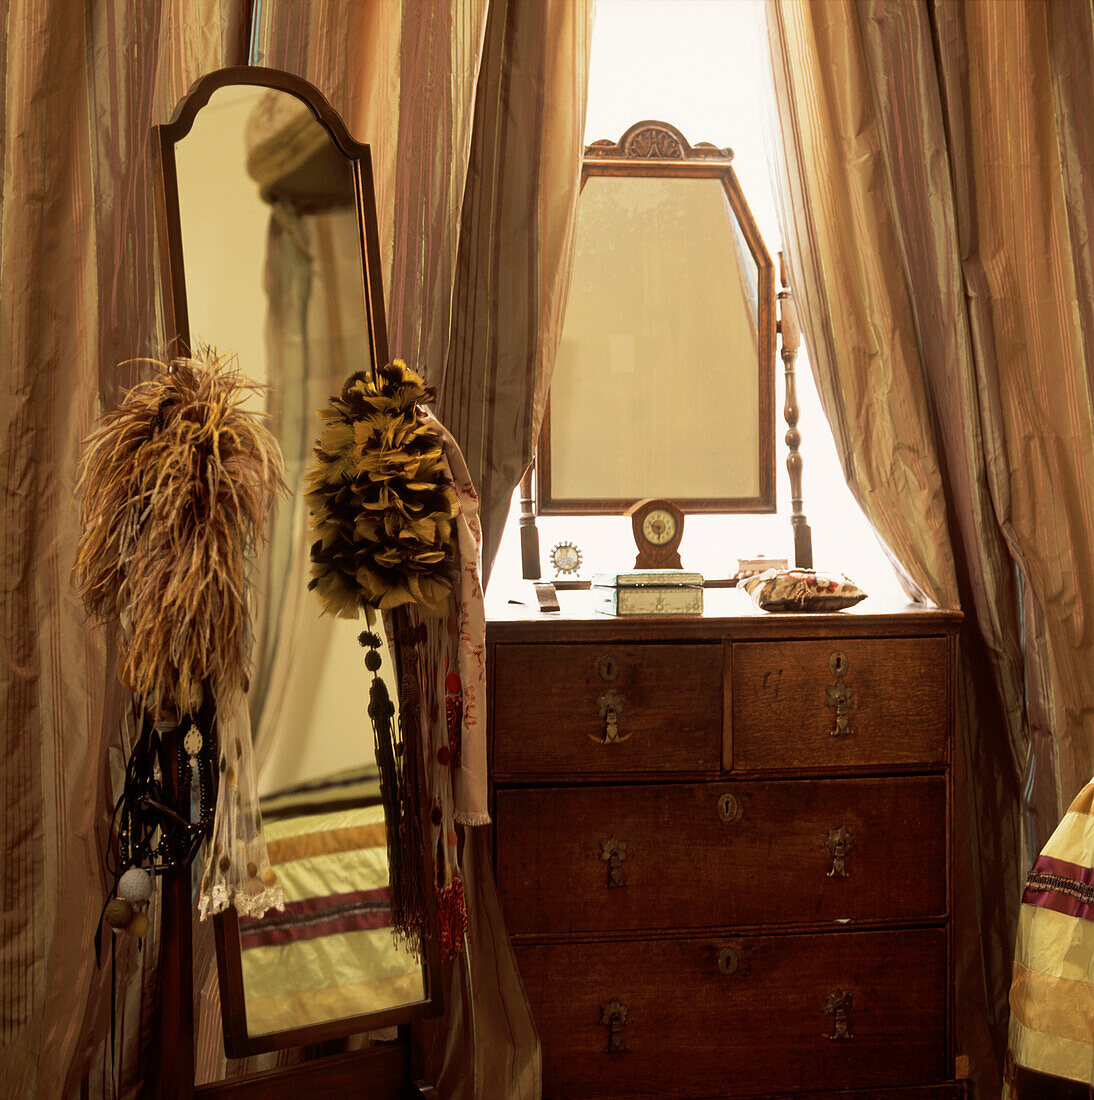 Bedroom detail with Cheval mirror and feather trimmings next to antique chest of drawers with uncut silk ribbon curtains